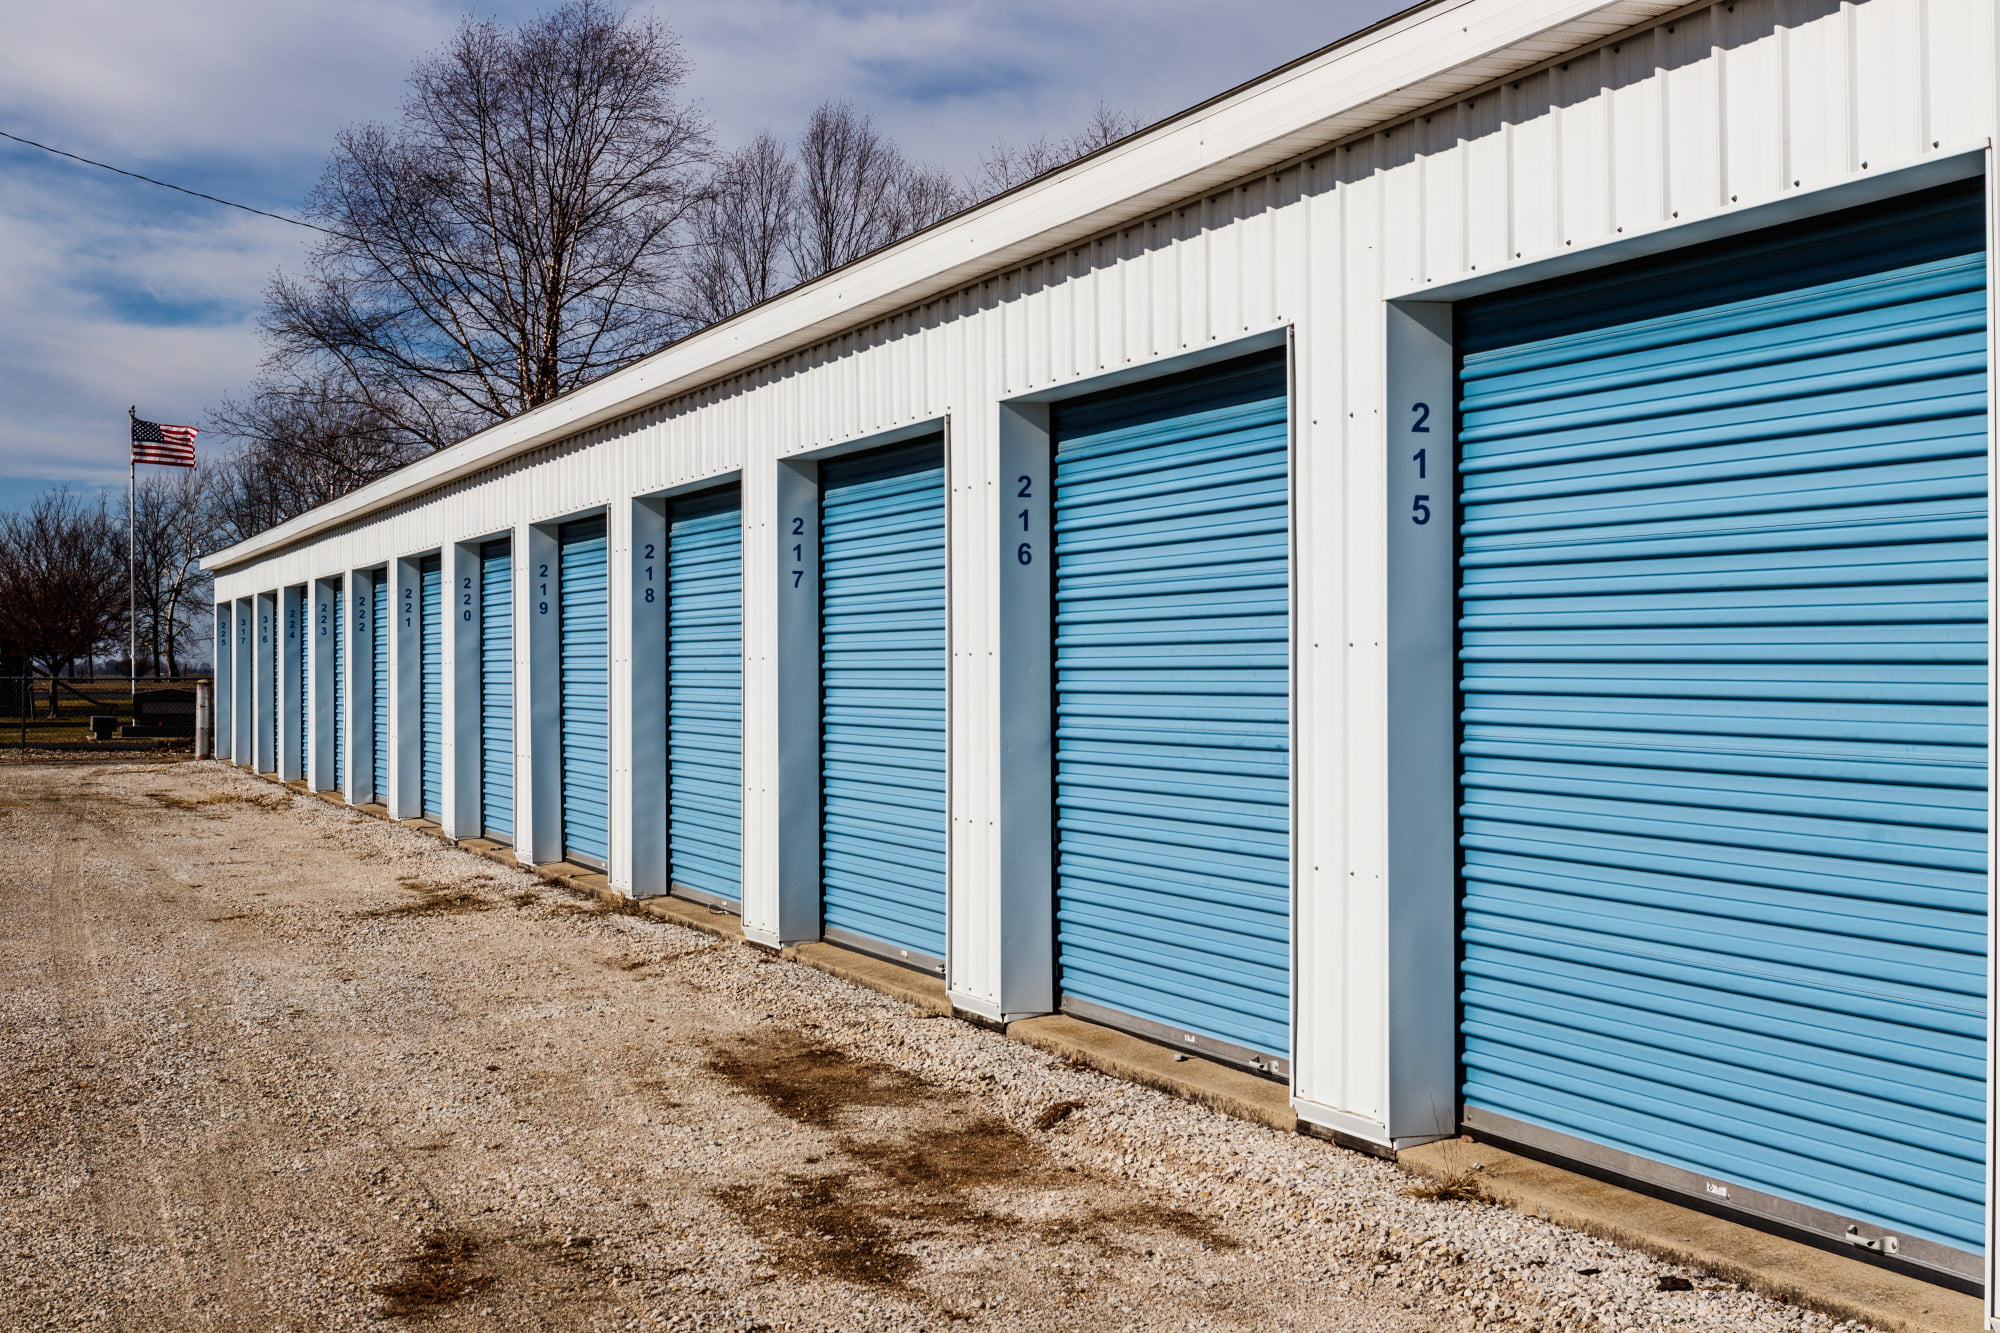 Are you looking for the best local storage companies? Take a moment to read about some benefits you'll want to consider.